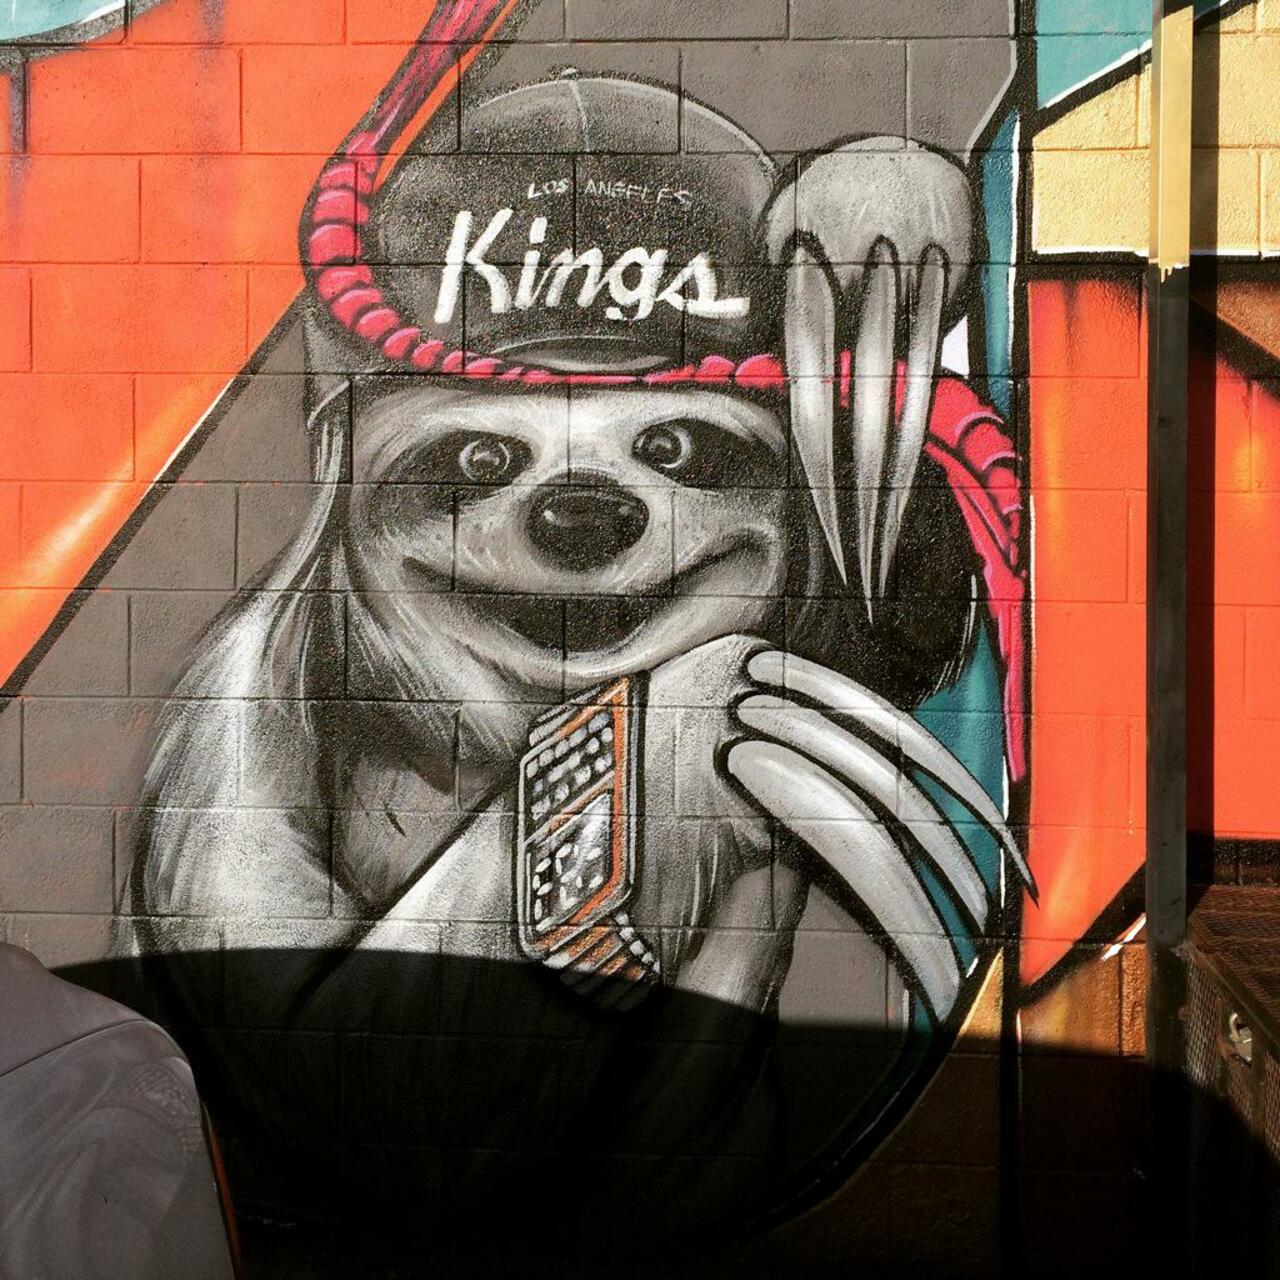 RT @ElChicano1976: #streetart #mural #graffiti supporting the #lakings who are fighting to stay alive in the ..  http://t.co/wzA4xbPvoy